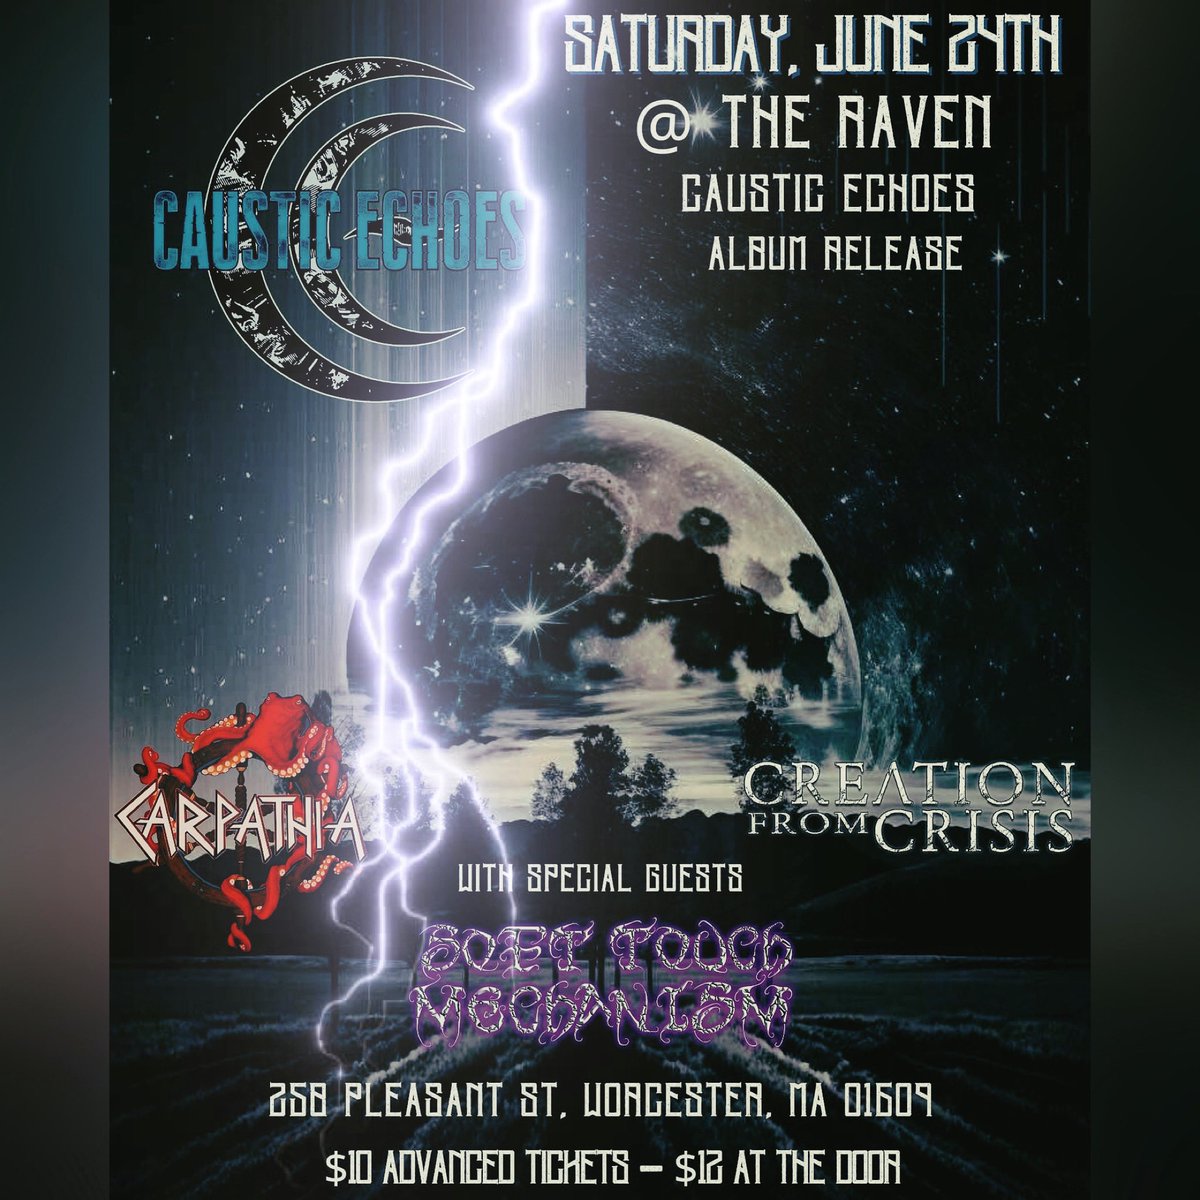 One week out from our next show at The Raven in Worcester, MA! 

See you there🤘🤘
#worcester #worcesterma #centralma #theraven #ravenworcester #altprogmetal #albumrelease #cdreleaseparty #maevents #saturdayjune24 #carpathia #causticechoes #creationfromcrisis #softtouchmechanism